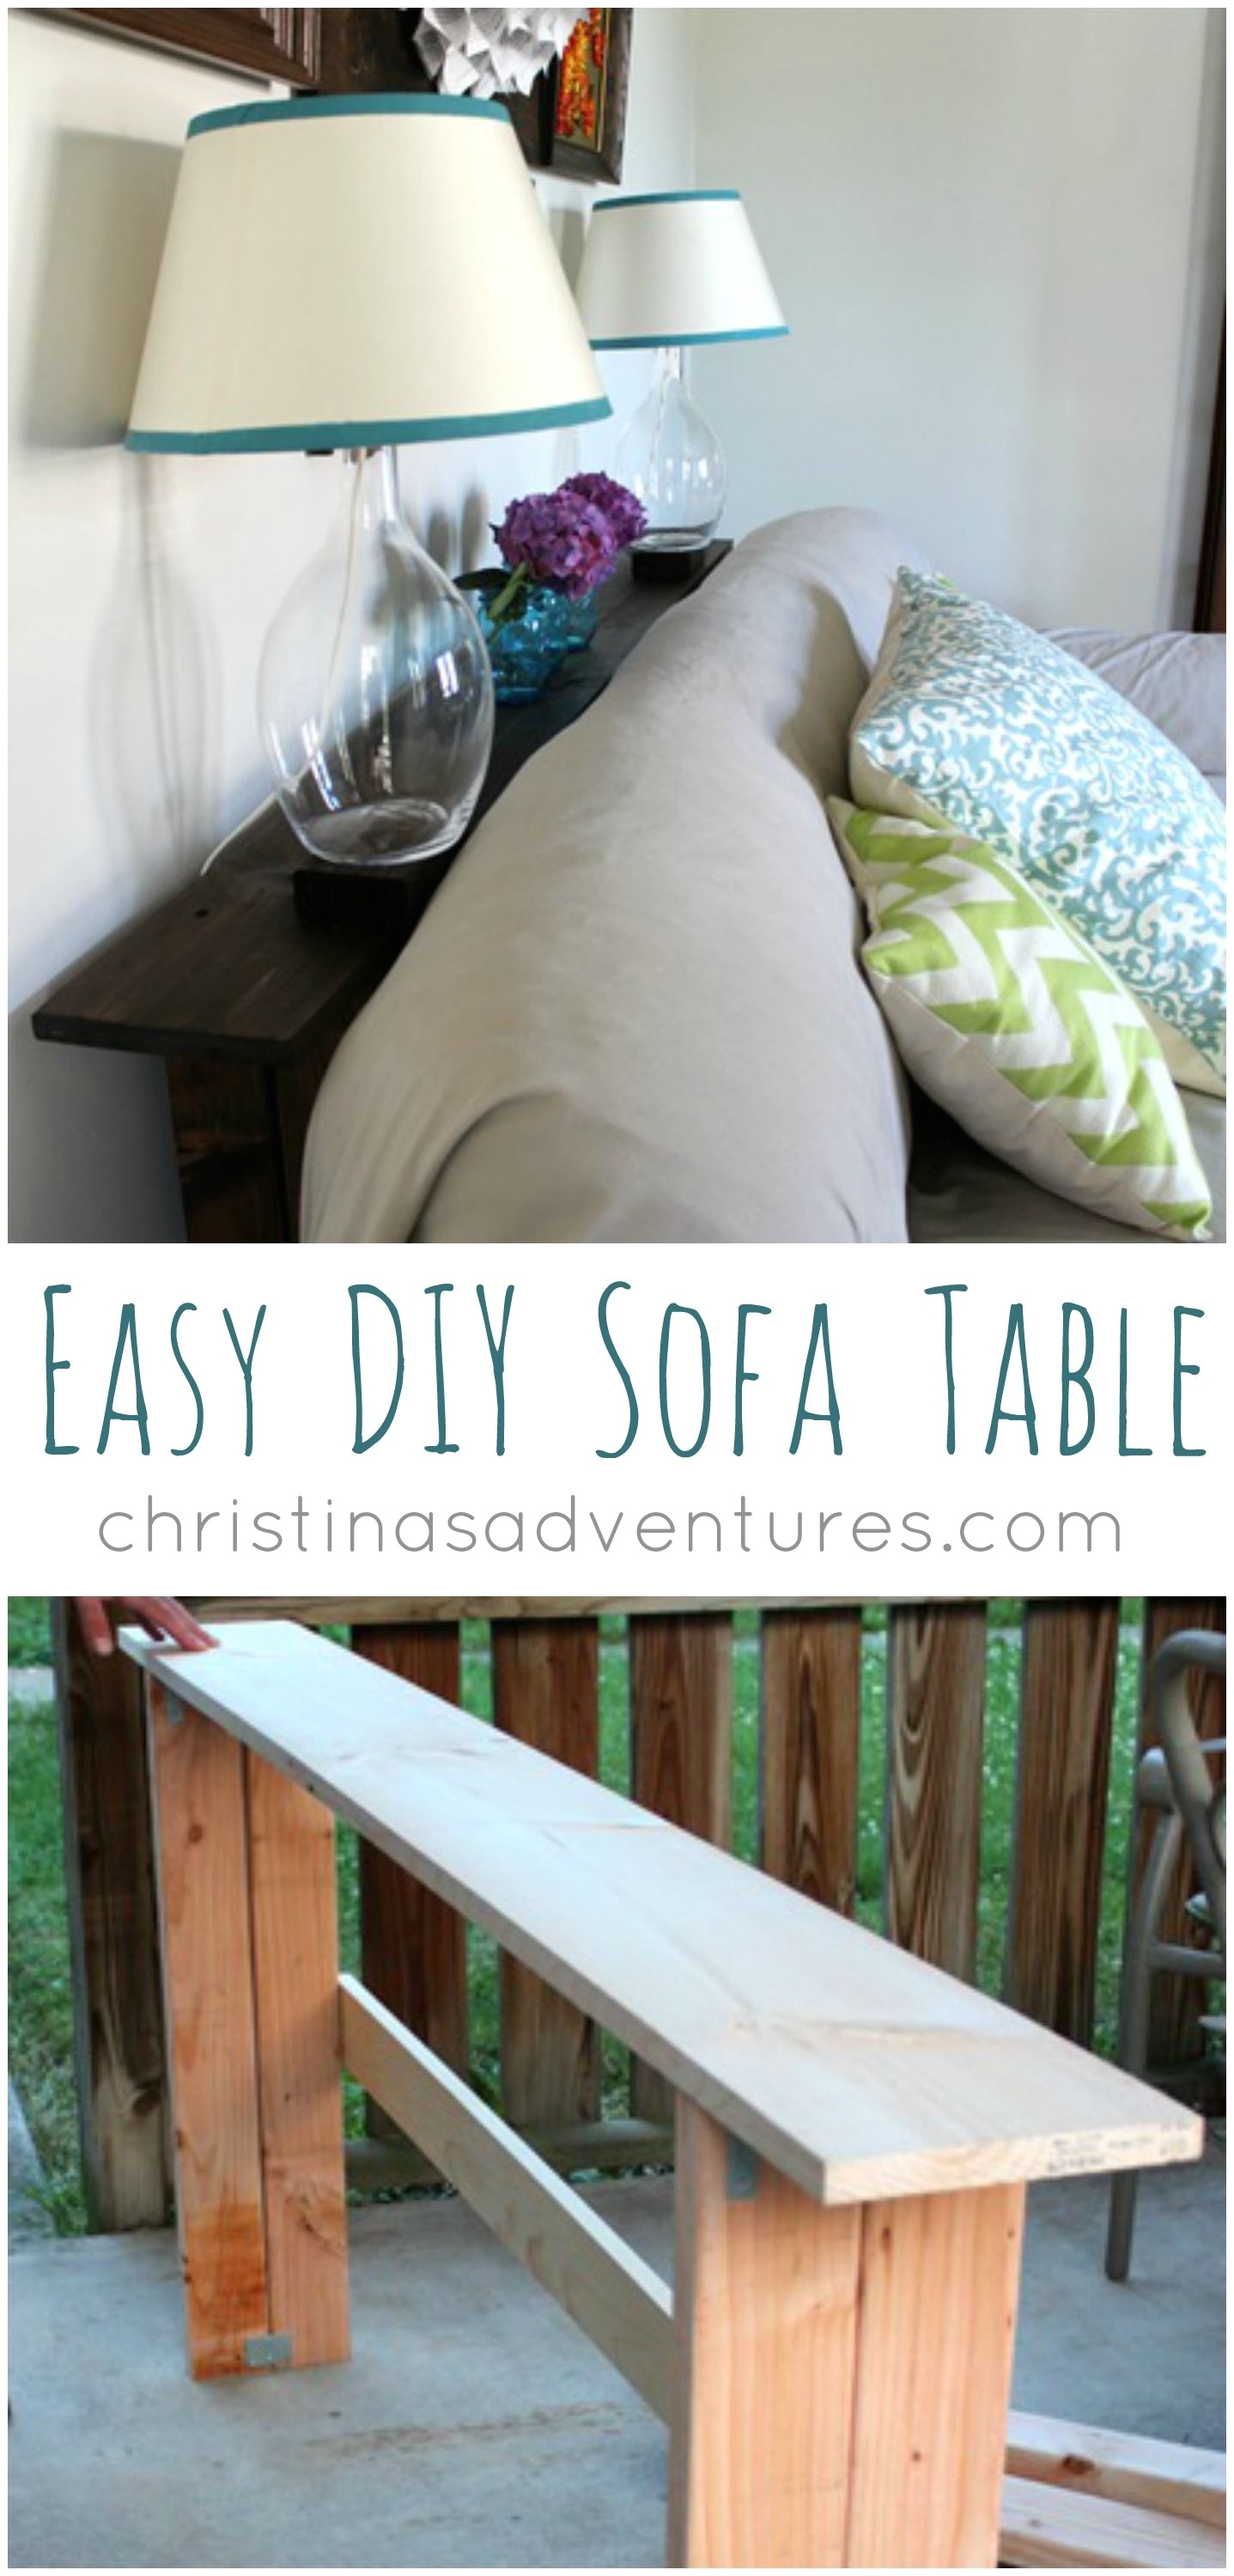 diy sofa table so simple to make perfect for holding lamps books and decorations christinasadventures com